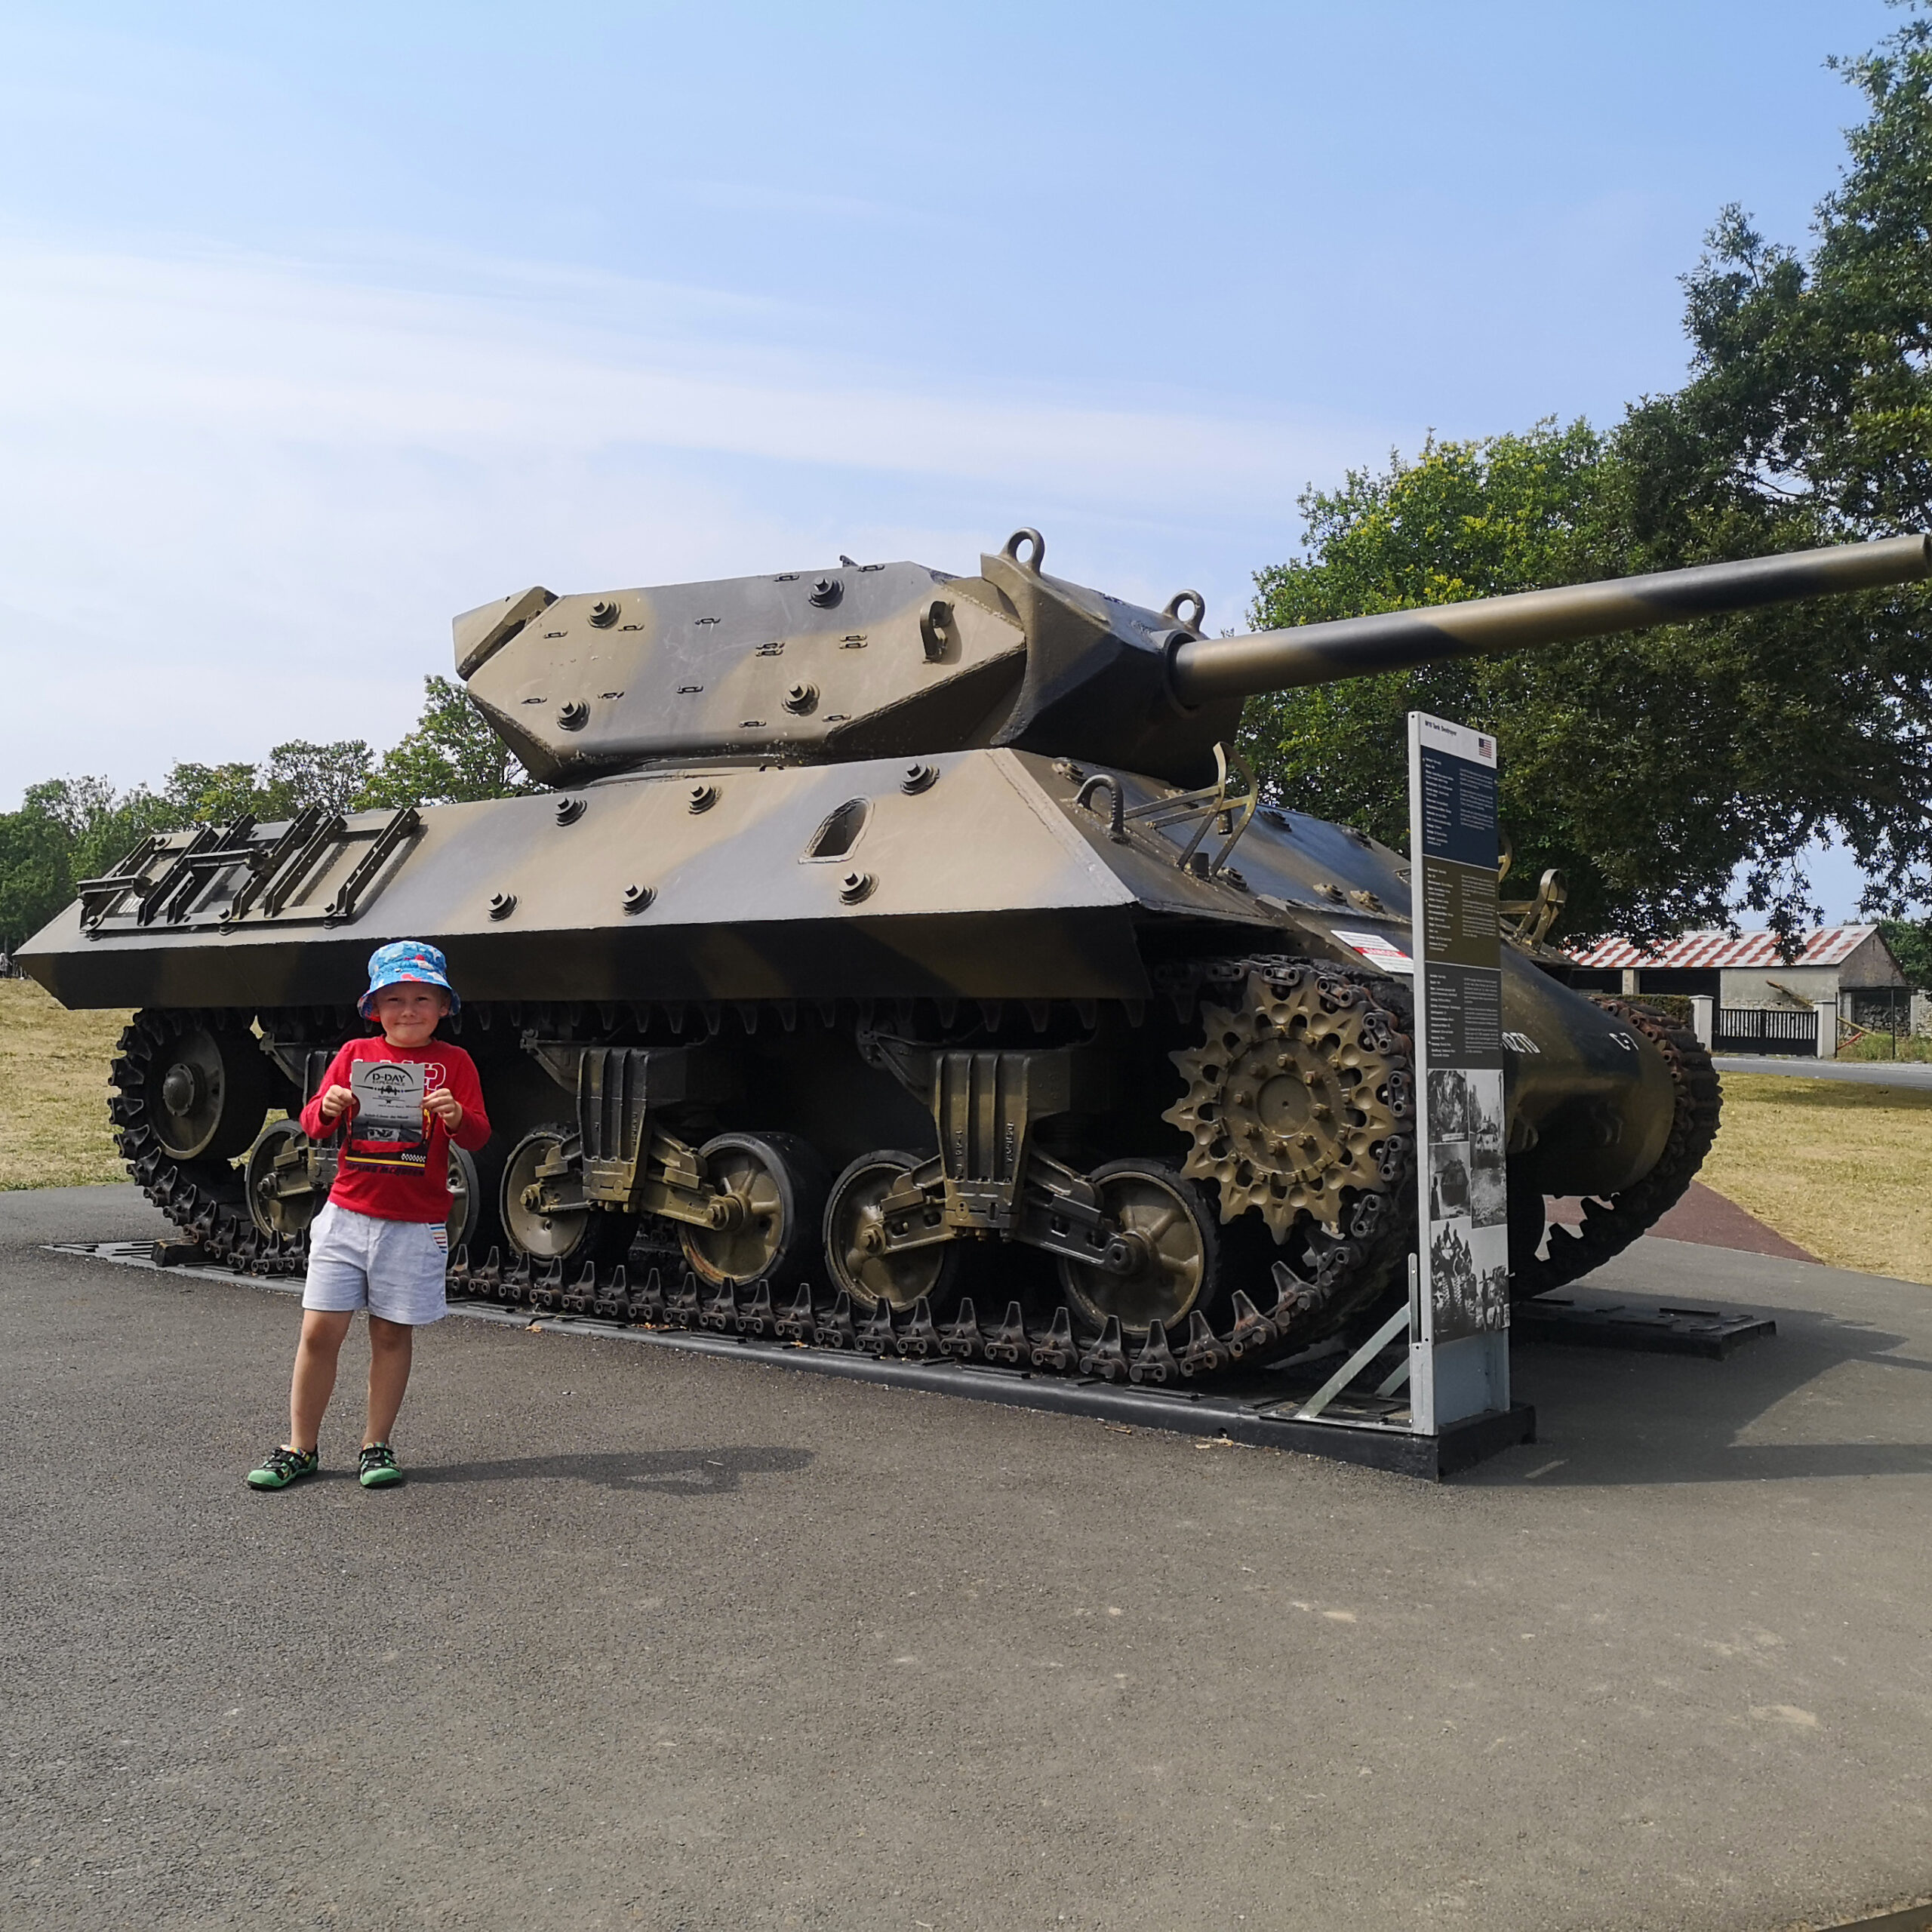 Things To Do In Normandy With Kids, Visit France, Visit Normandy, Normandy Tourism, Brittany Ferries, Family-Friendly, Family Holidays, Activities to Do, The Frenchie Mummy, Travel Blog, Family Travel, Cherbourg, French Beaches, WWII, Omaha Beach, Overlord Museum